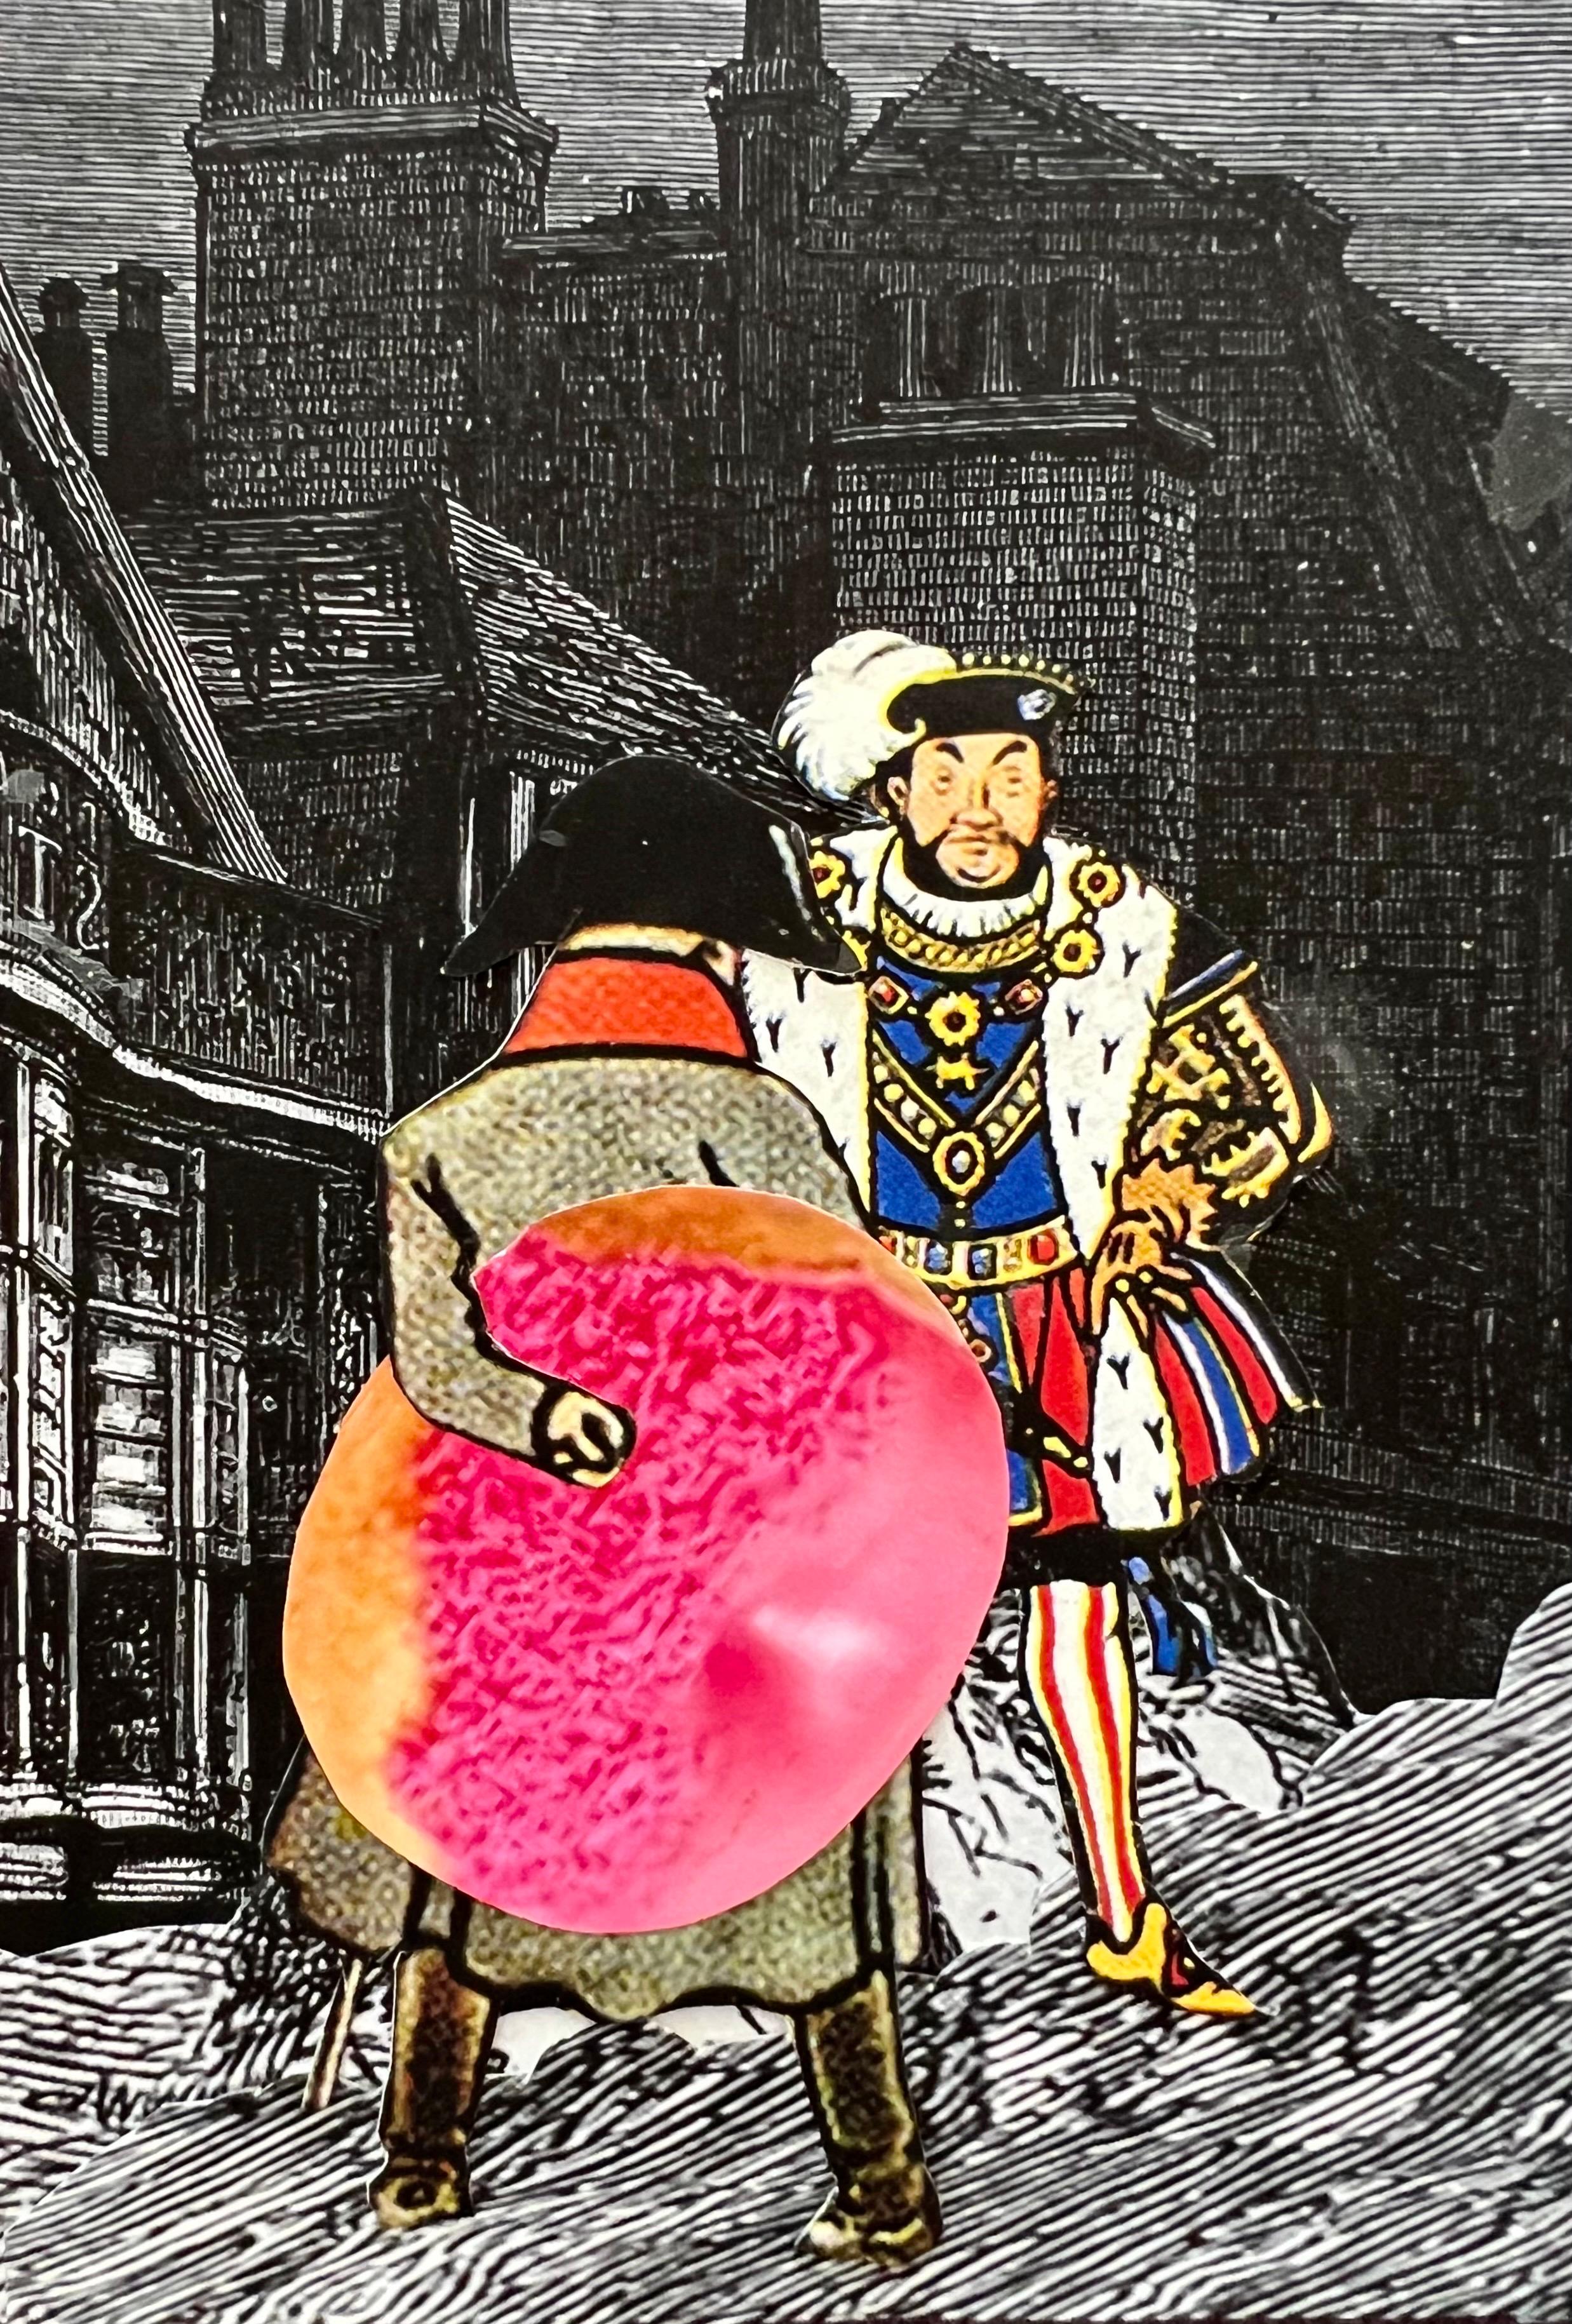 DAVID JAMES GILHOOLY (American, 1943-2013), 
Mixed media collage
6 x 4 inches,  
Hand signed and dated verso
Napoleon from the back, with King Henry VIII holding a pastry. 
titled: 